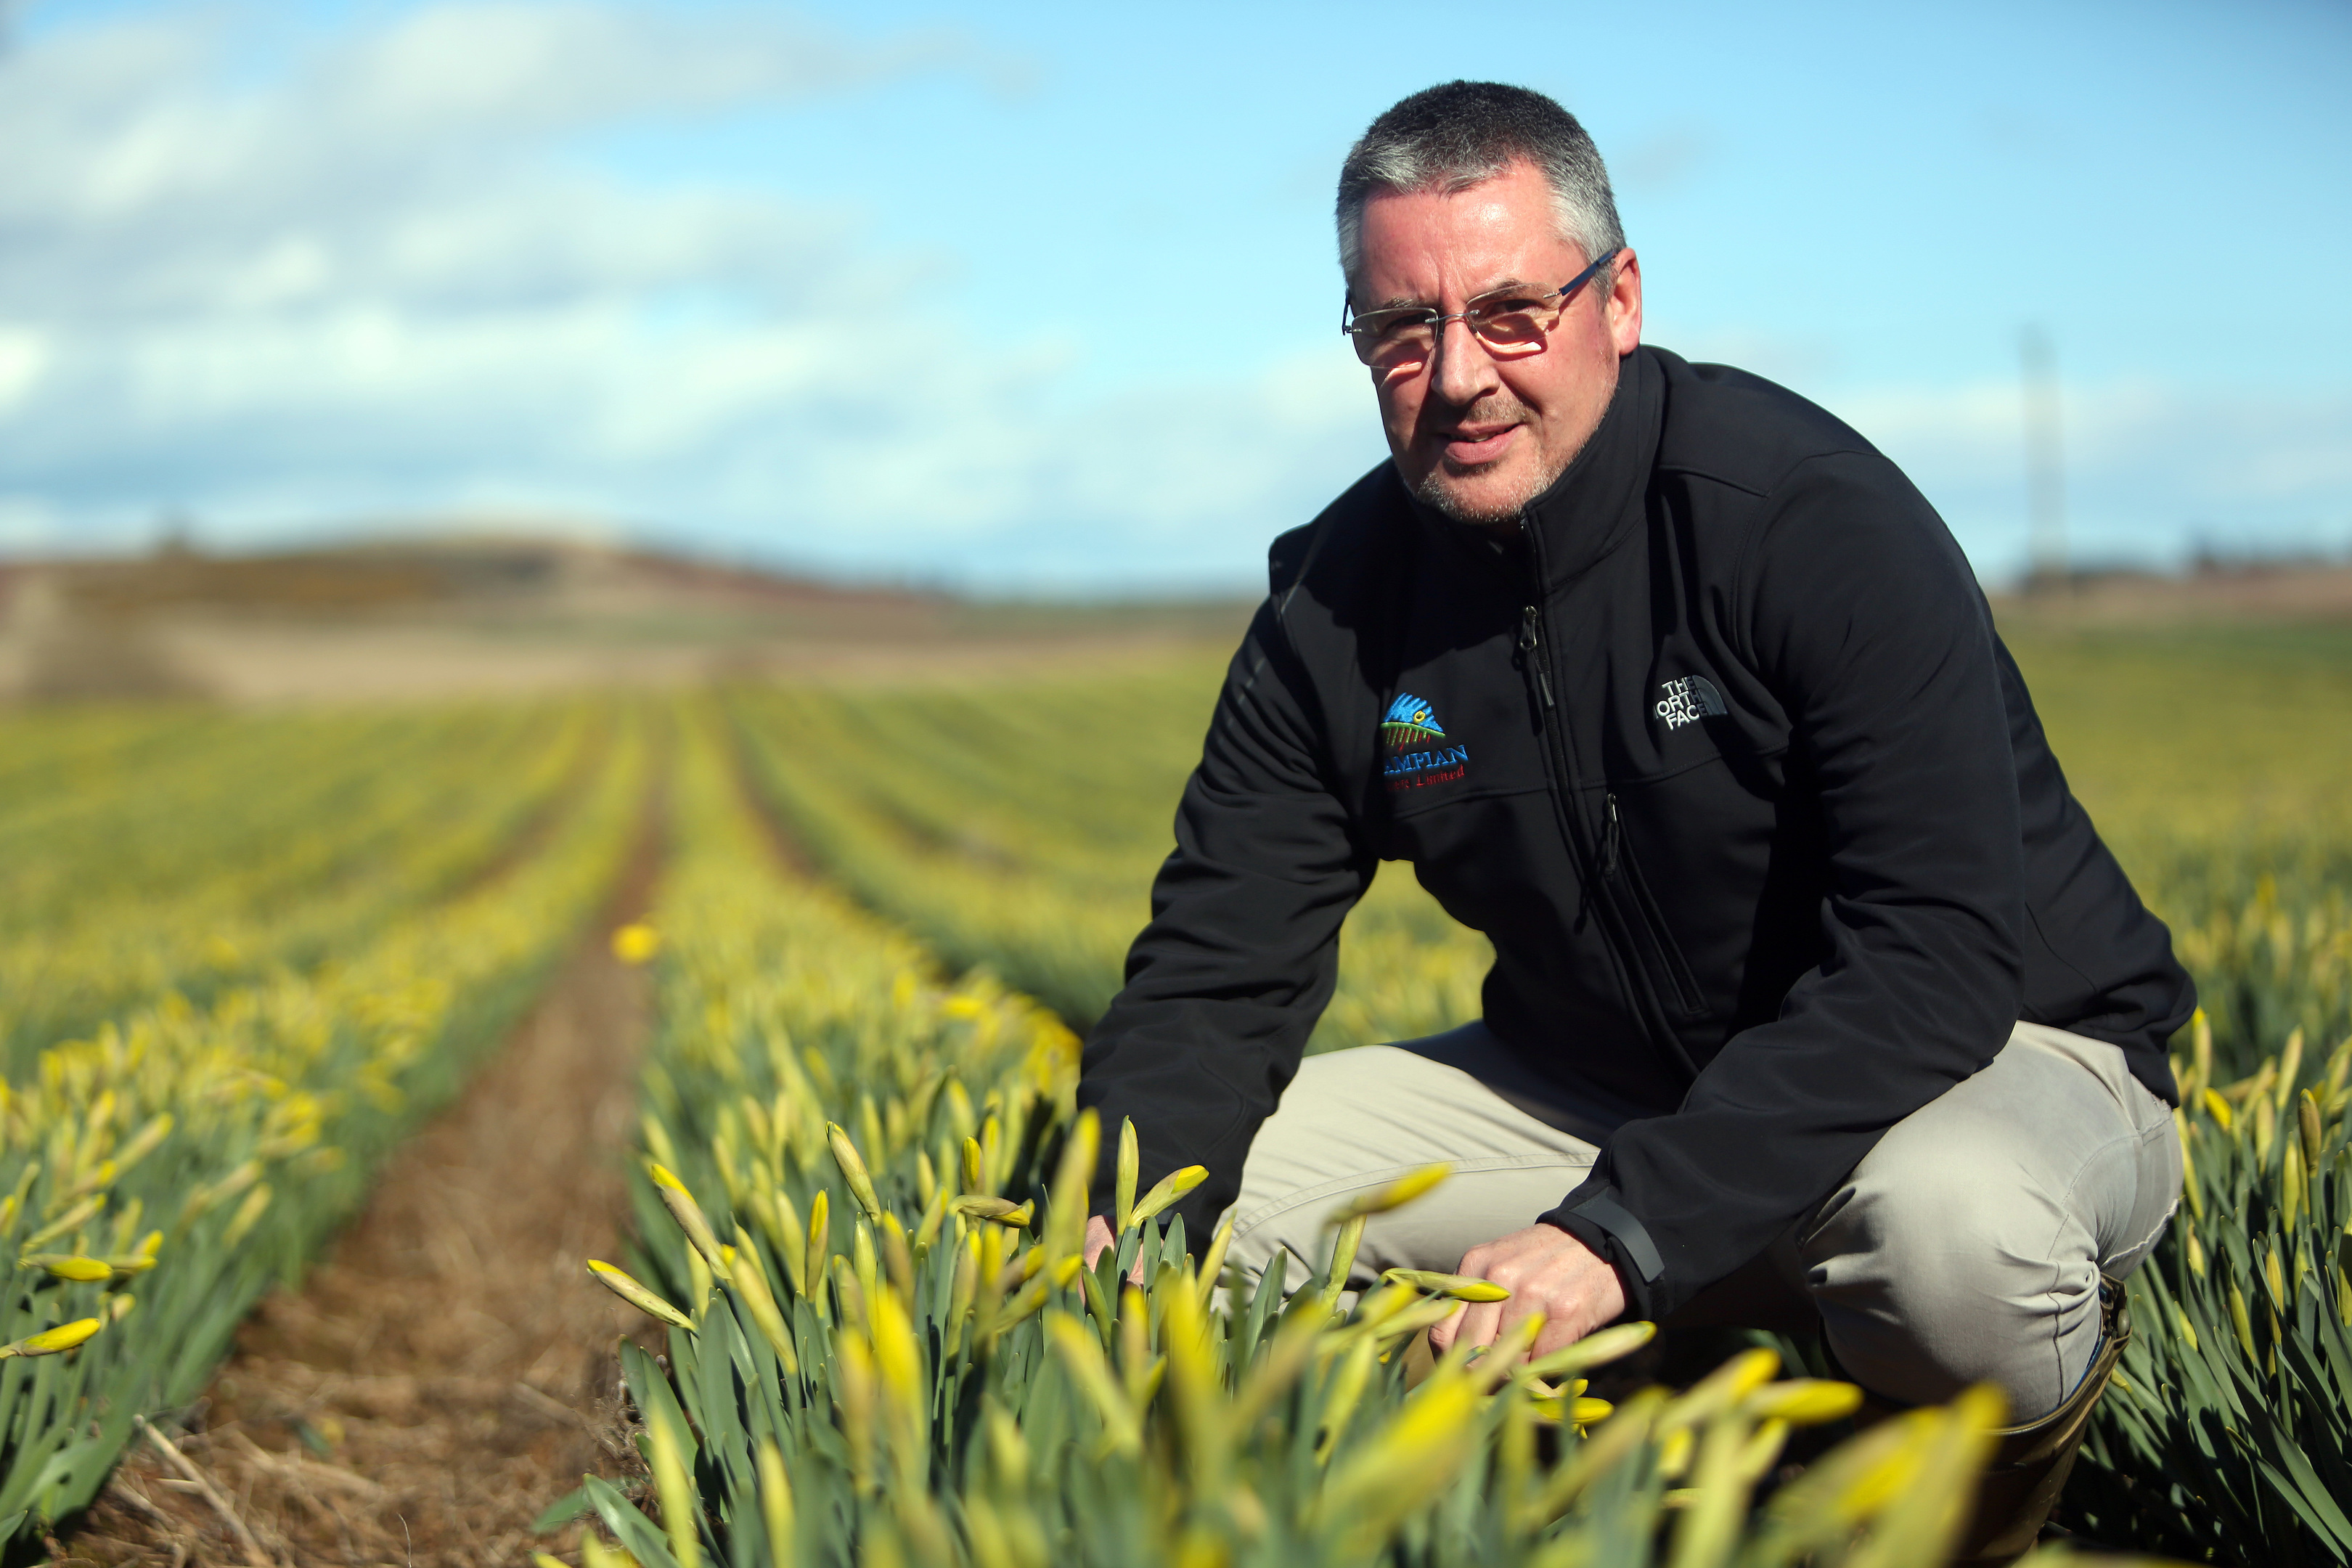 Growers are facing a double whammy as bulb yields have already been compromised by the late season.